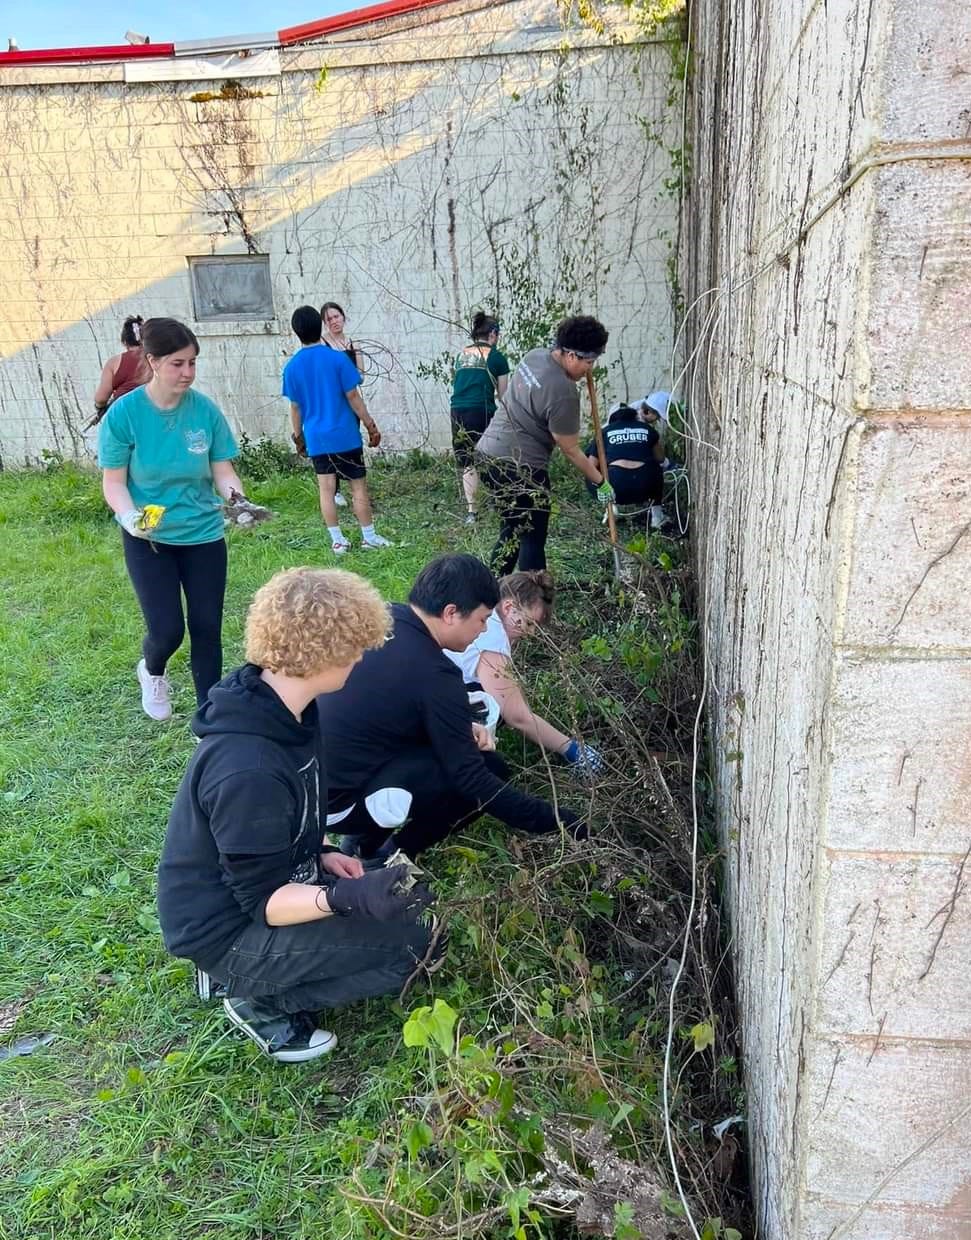 A group of nine students are doing yard work and weeding in a park.